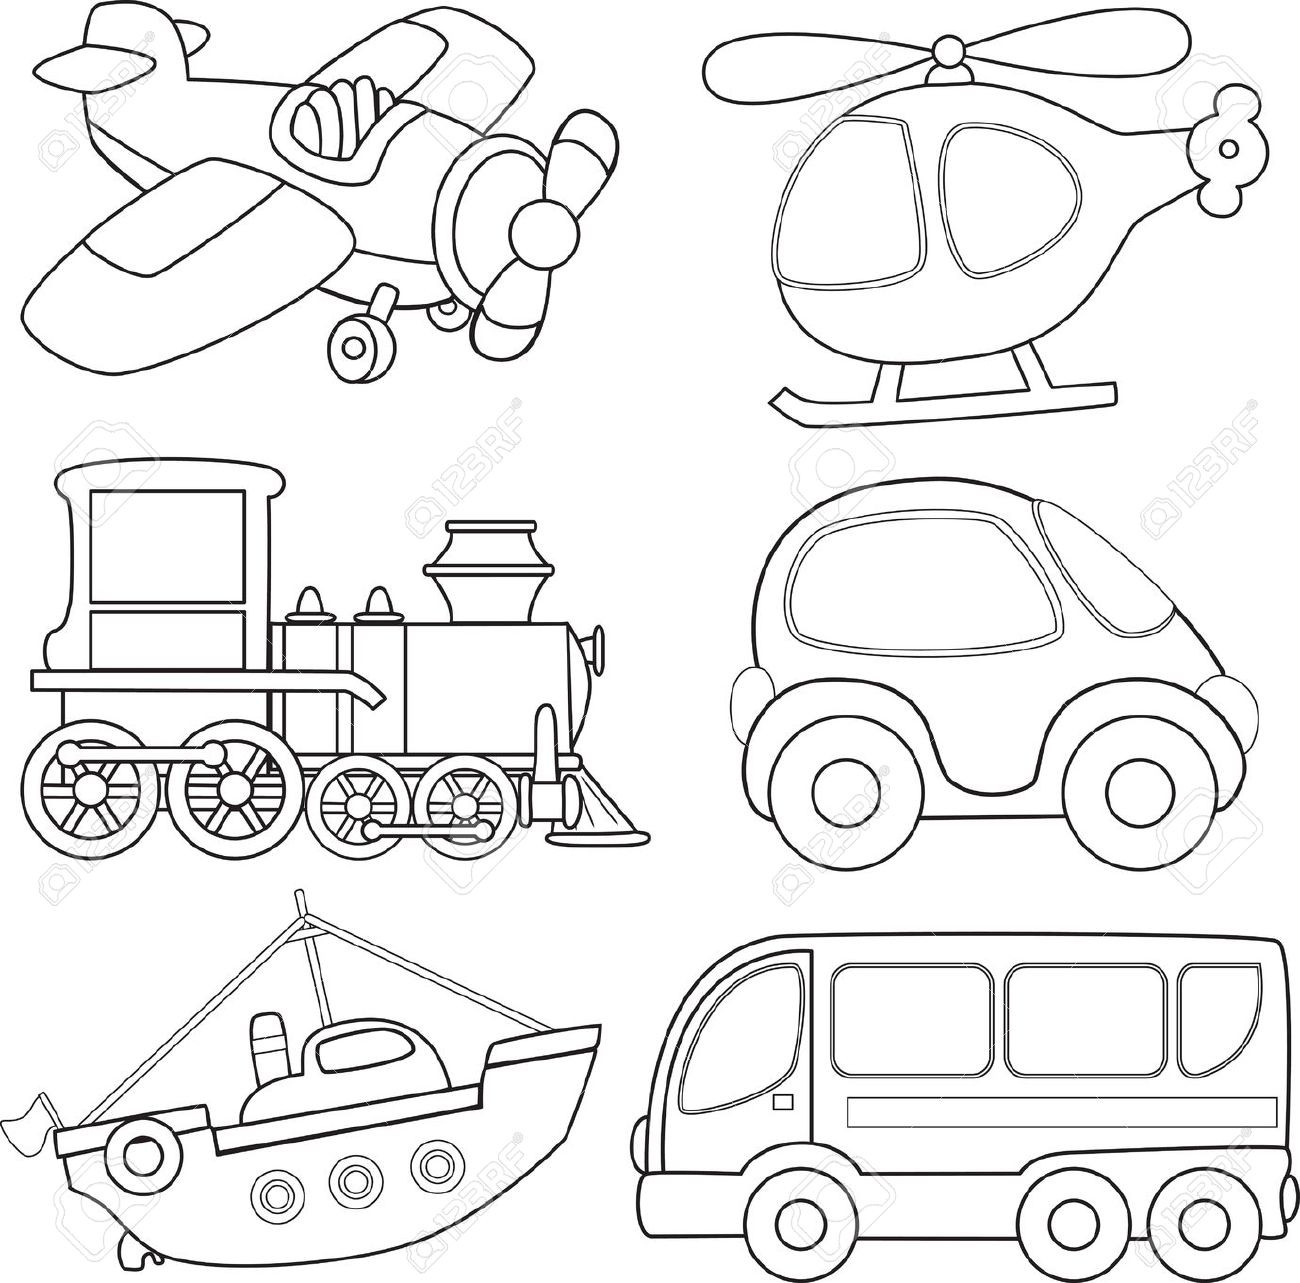 44-best-ideas-for-coloring-transportation-coloring-pages-for-kids